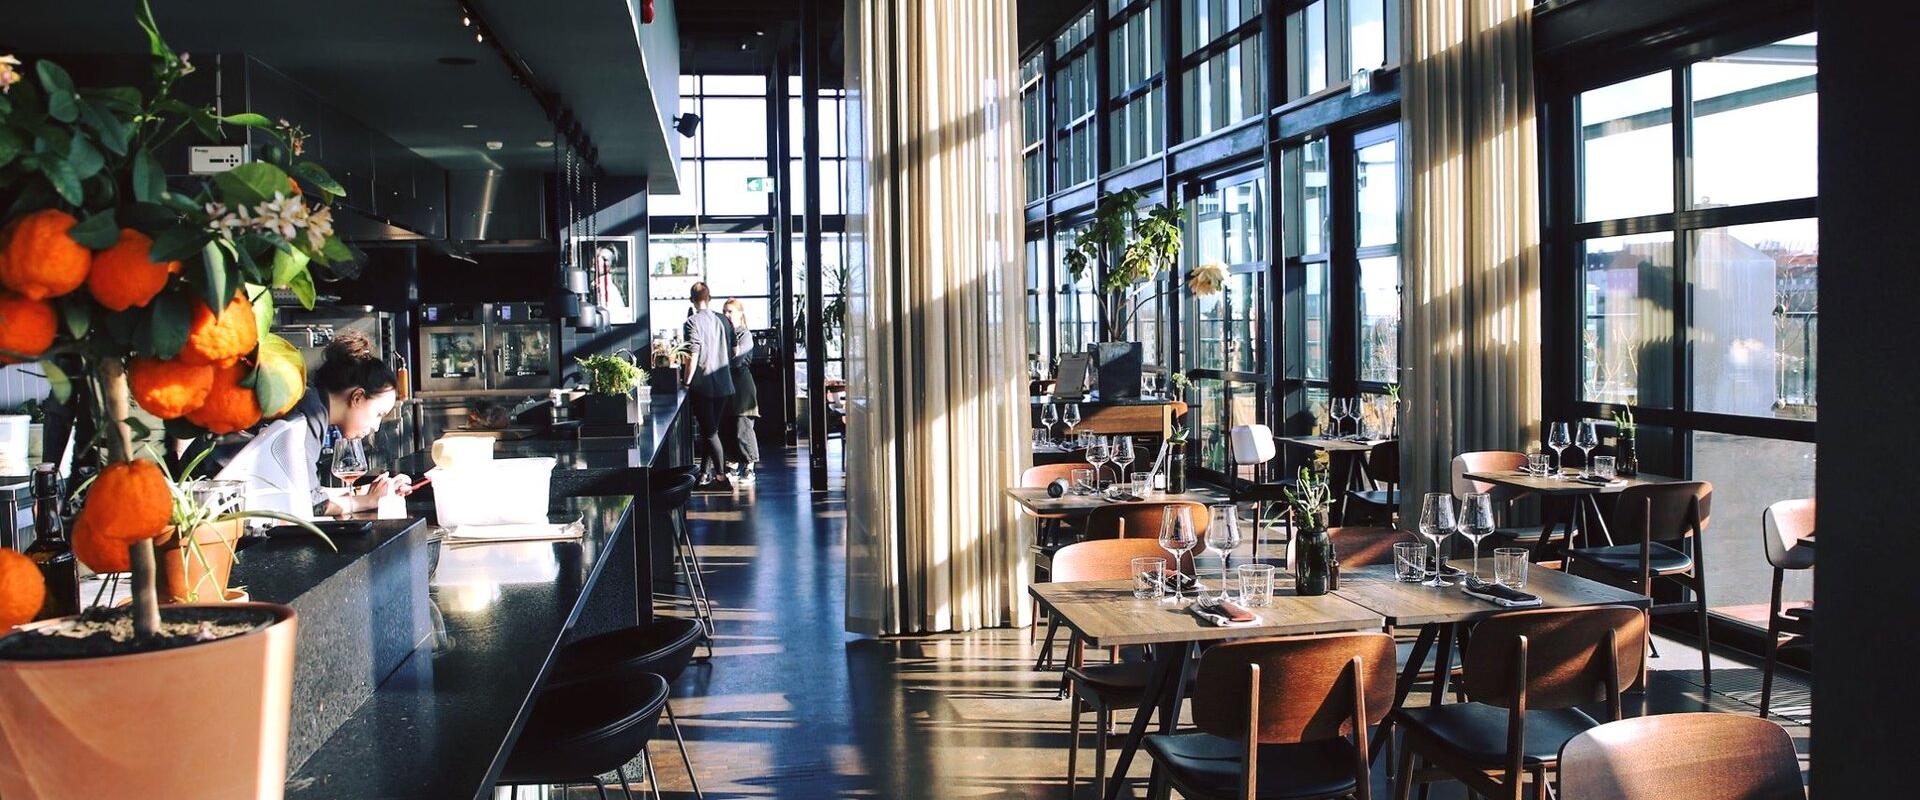 Restaurant Fotografiska works on a zero-waste basis. We use inventive ways in cooking – we don't waste ingredients or create waste. Everything from th